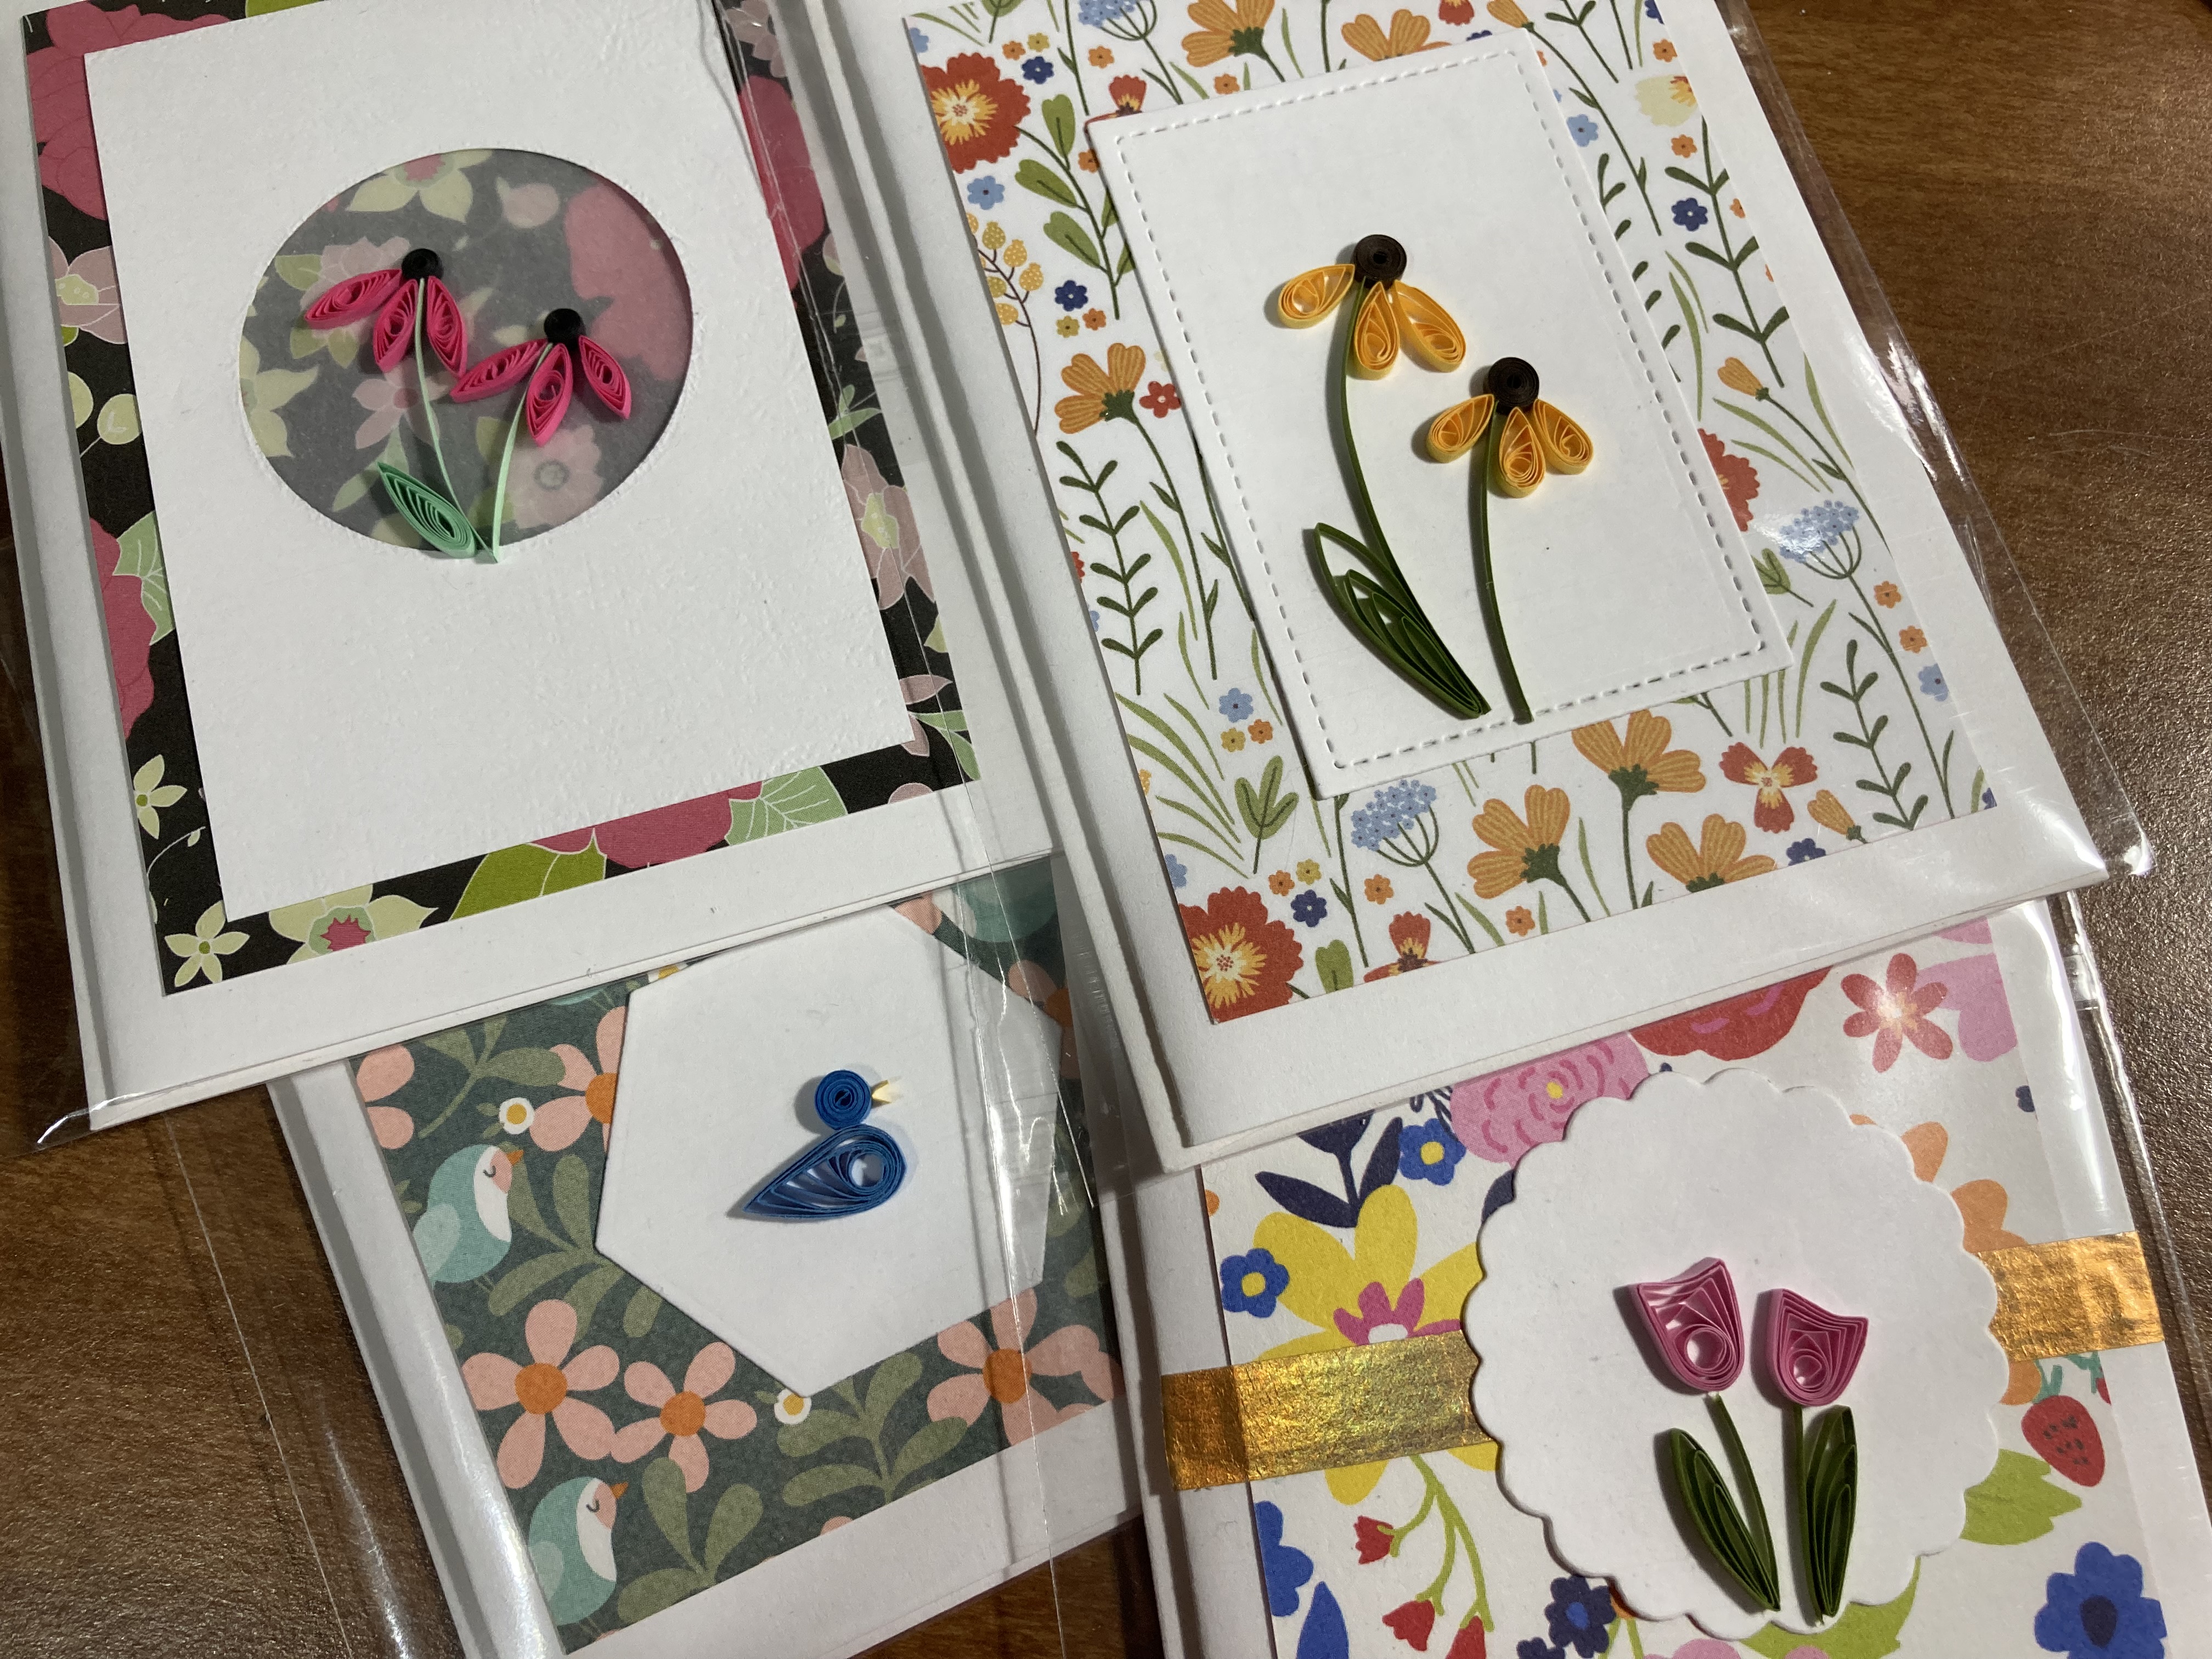  a picture of paper quilled greeting cards. One card features a pink flower with floral border, one has a yellow flower with floral border, one has a blue duck with floral border, and one has a pink tulip with floral border. 